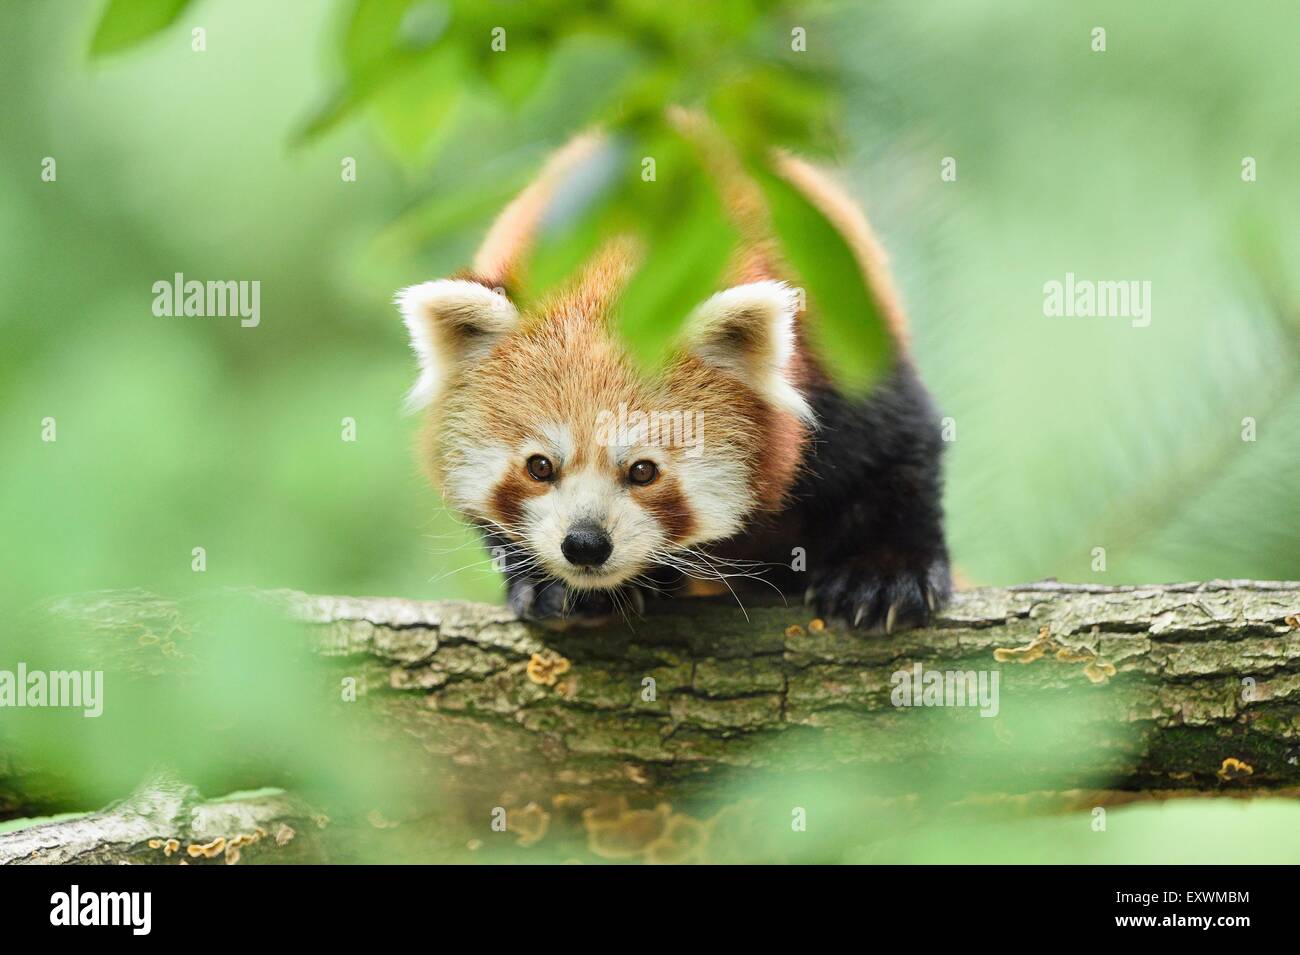 Red panda on a branch Stock Photo